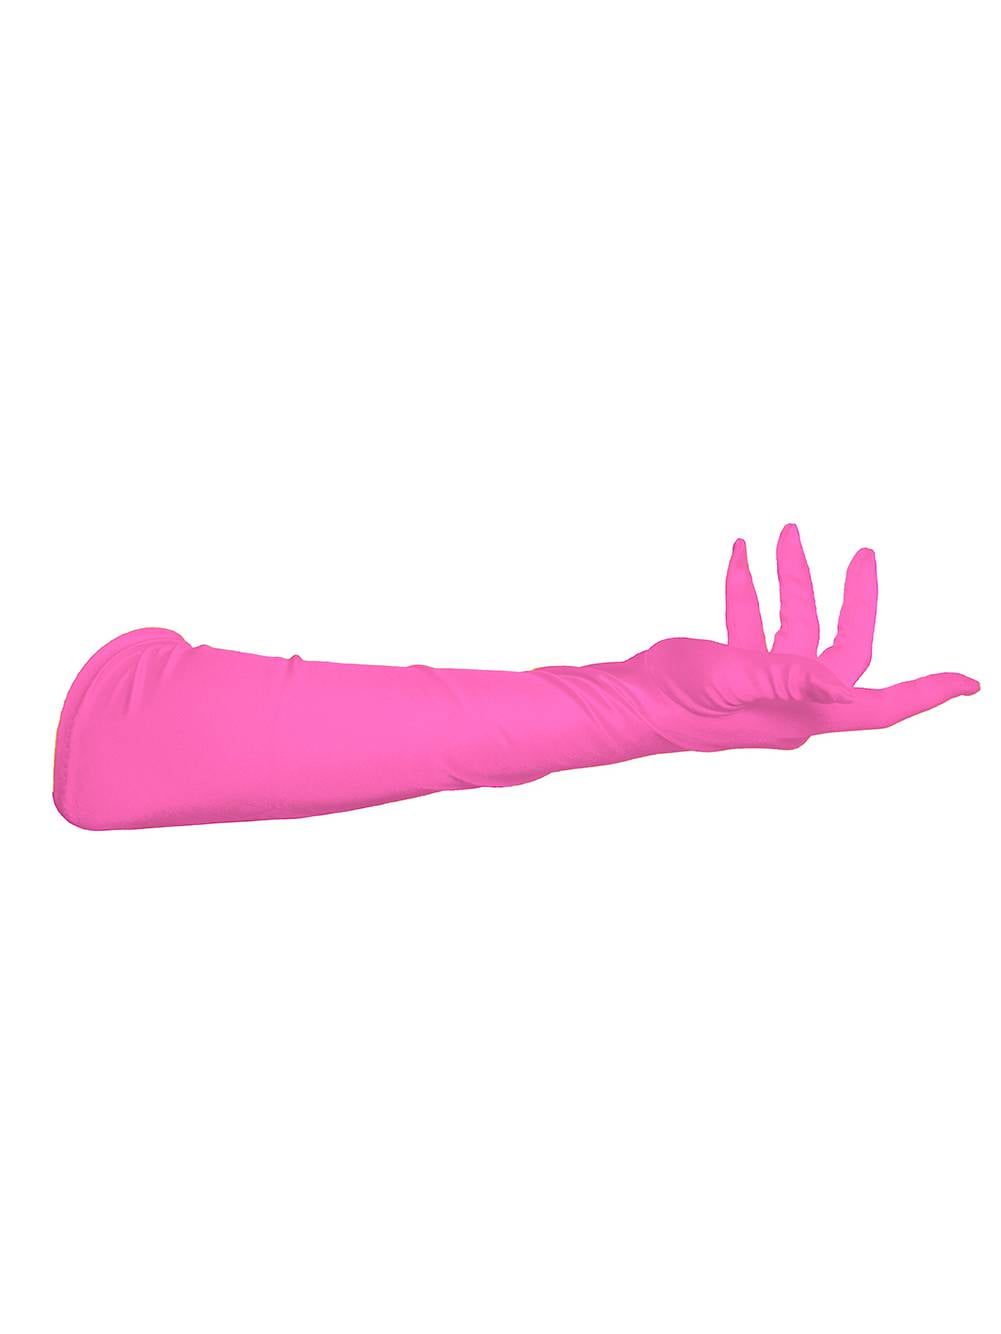 23" FUCHSIA fingerless HOT PINK STRETCH SATIN PROM COSPLAY PARTY COSTUME GLOVES 